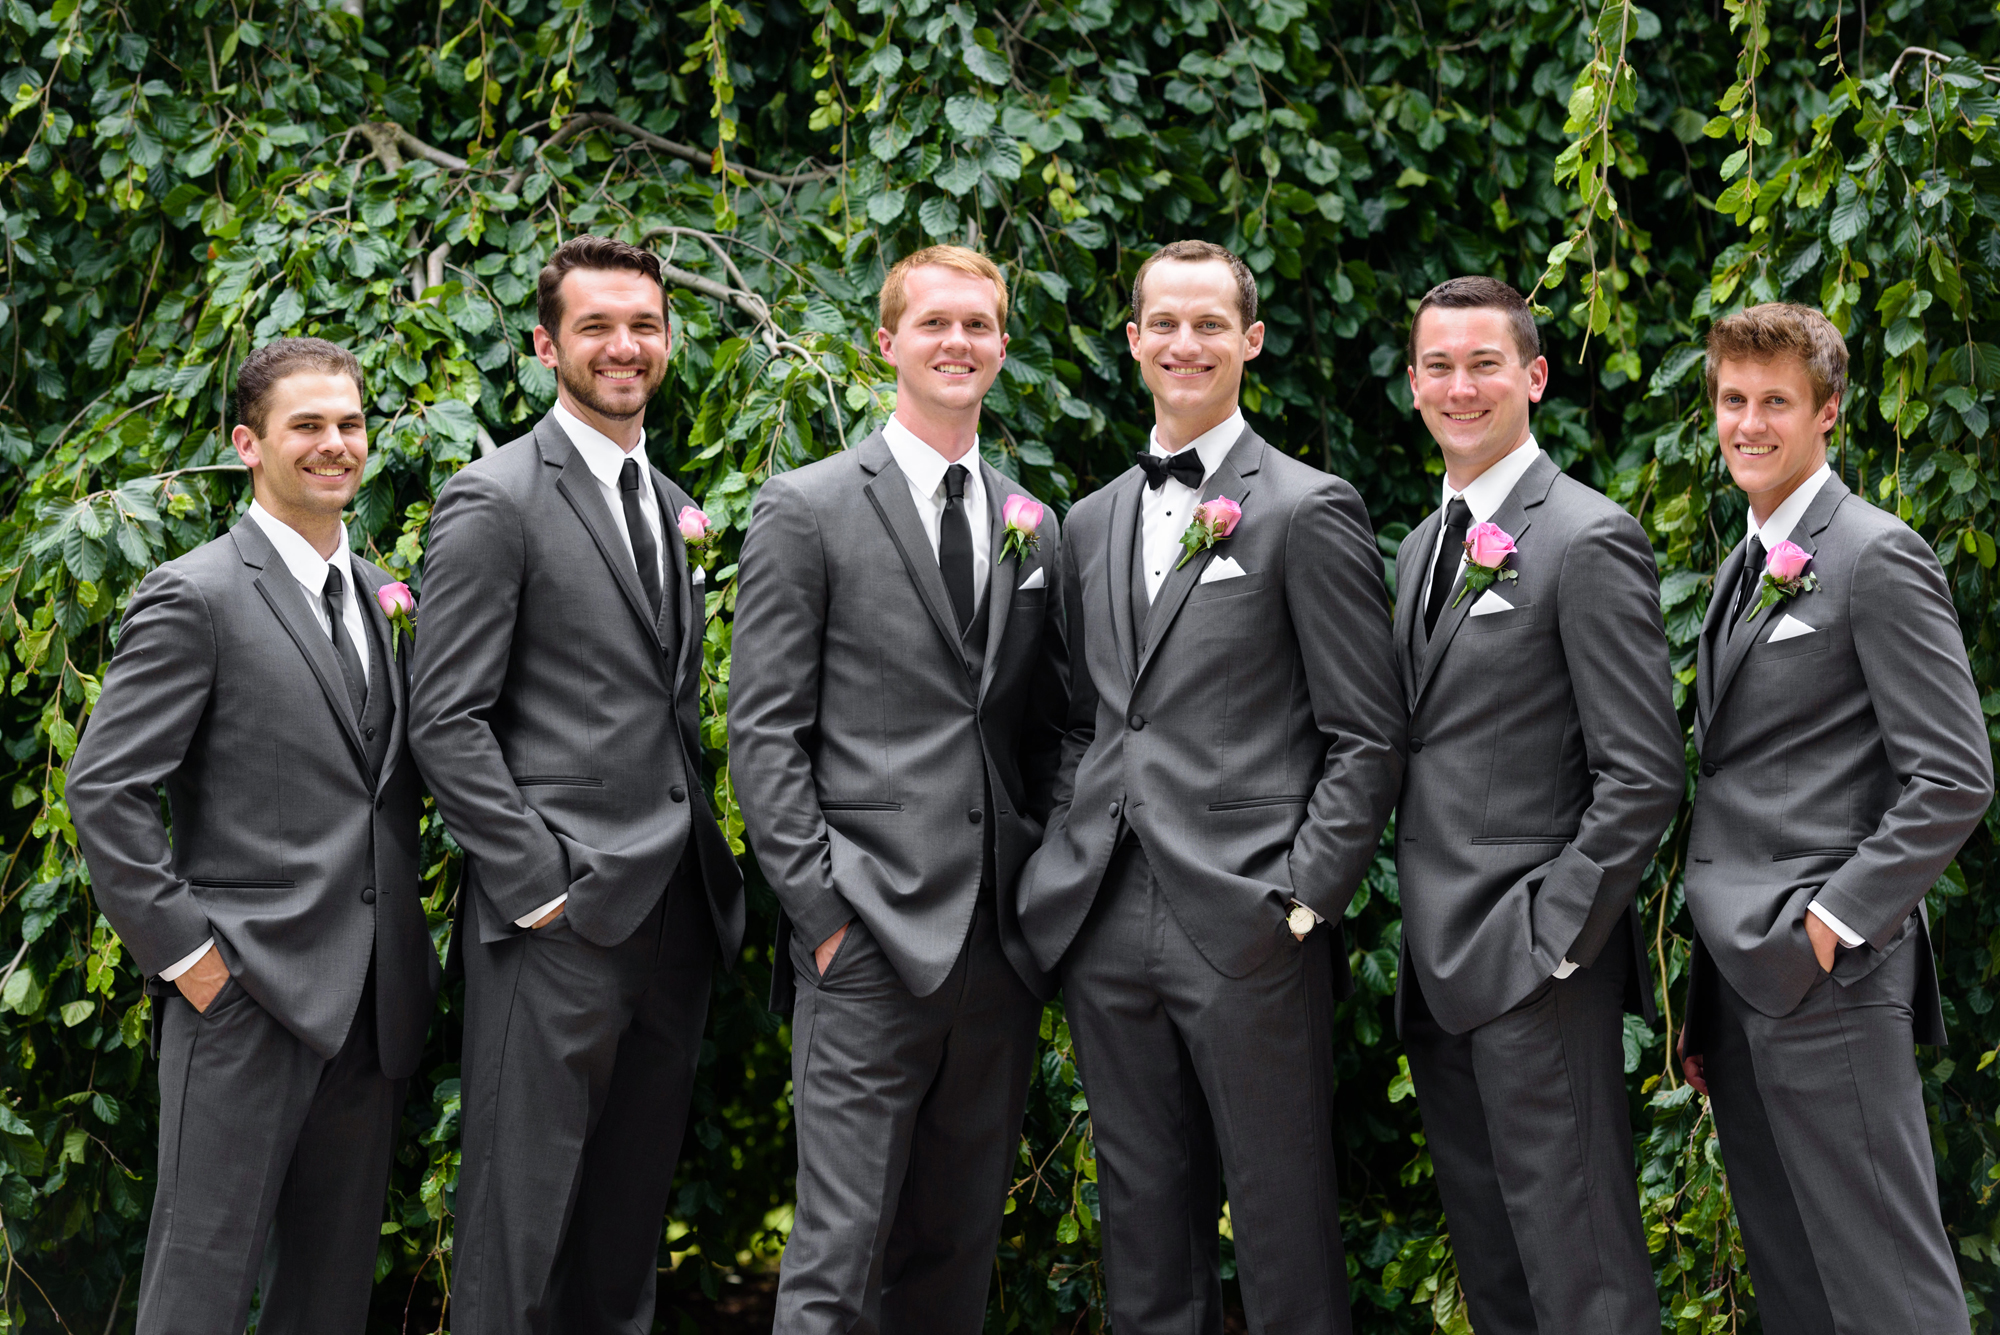 Groomsmen in front of an exotic California inspired tree after a wedding ceremony at the Basilica of the Sacred Heart on the campus of the University of Notre Dame